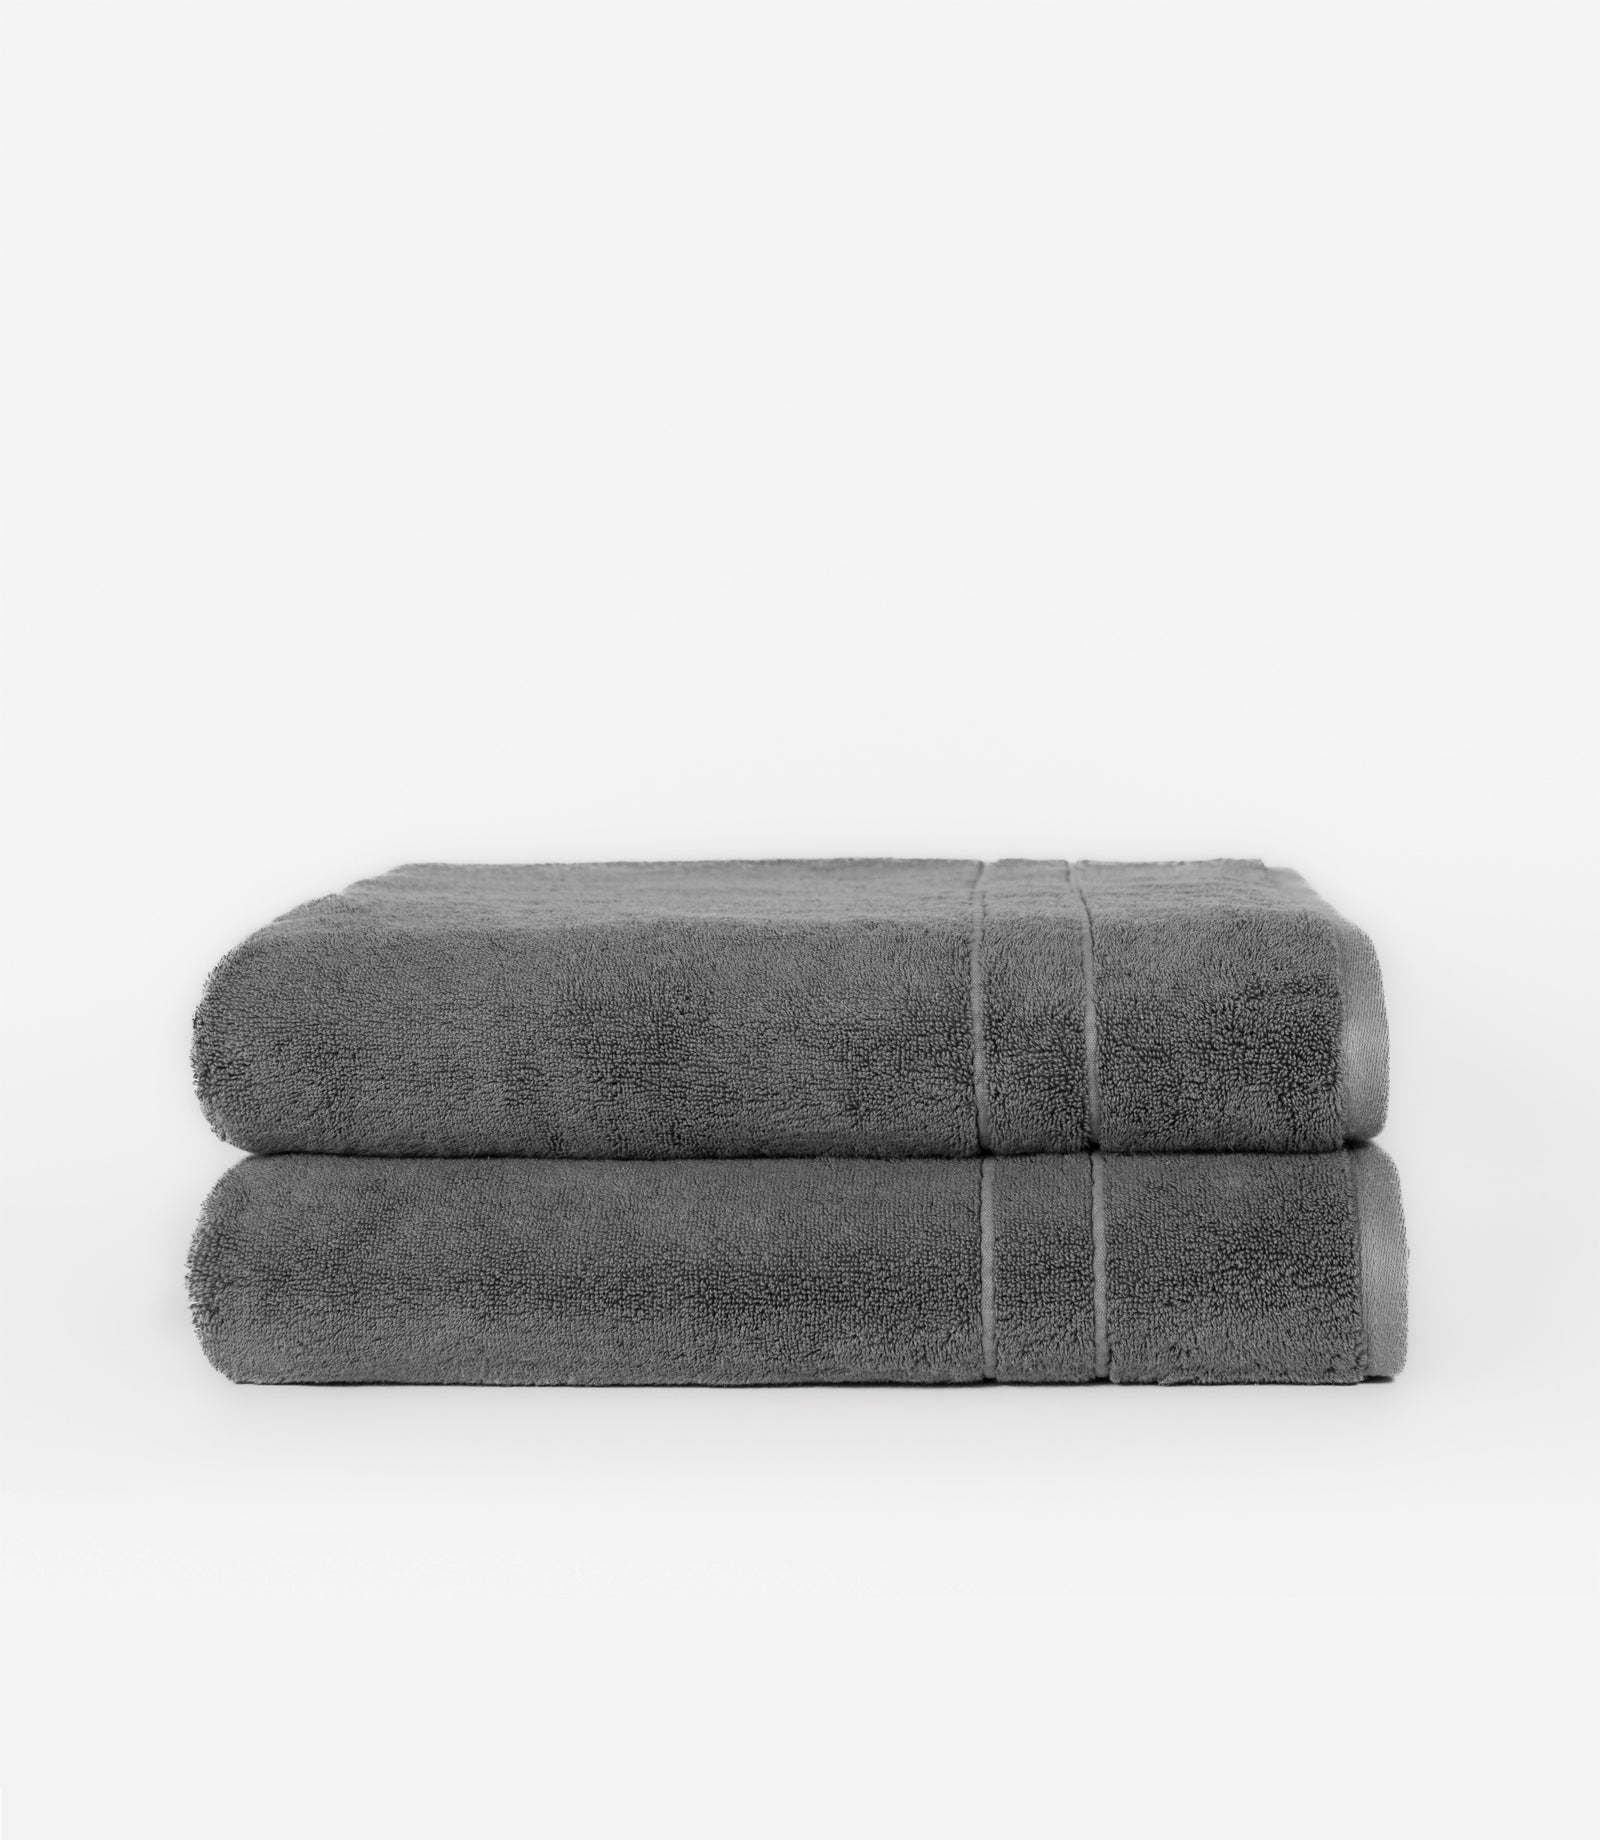 Premium Plush Bath Sheets in the color charcoal. Photo of bath sheets taken with white background 